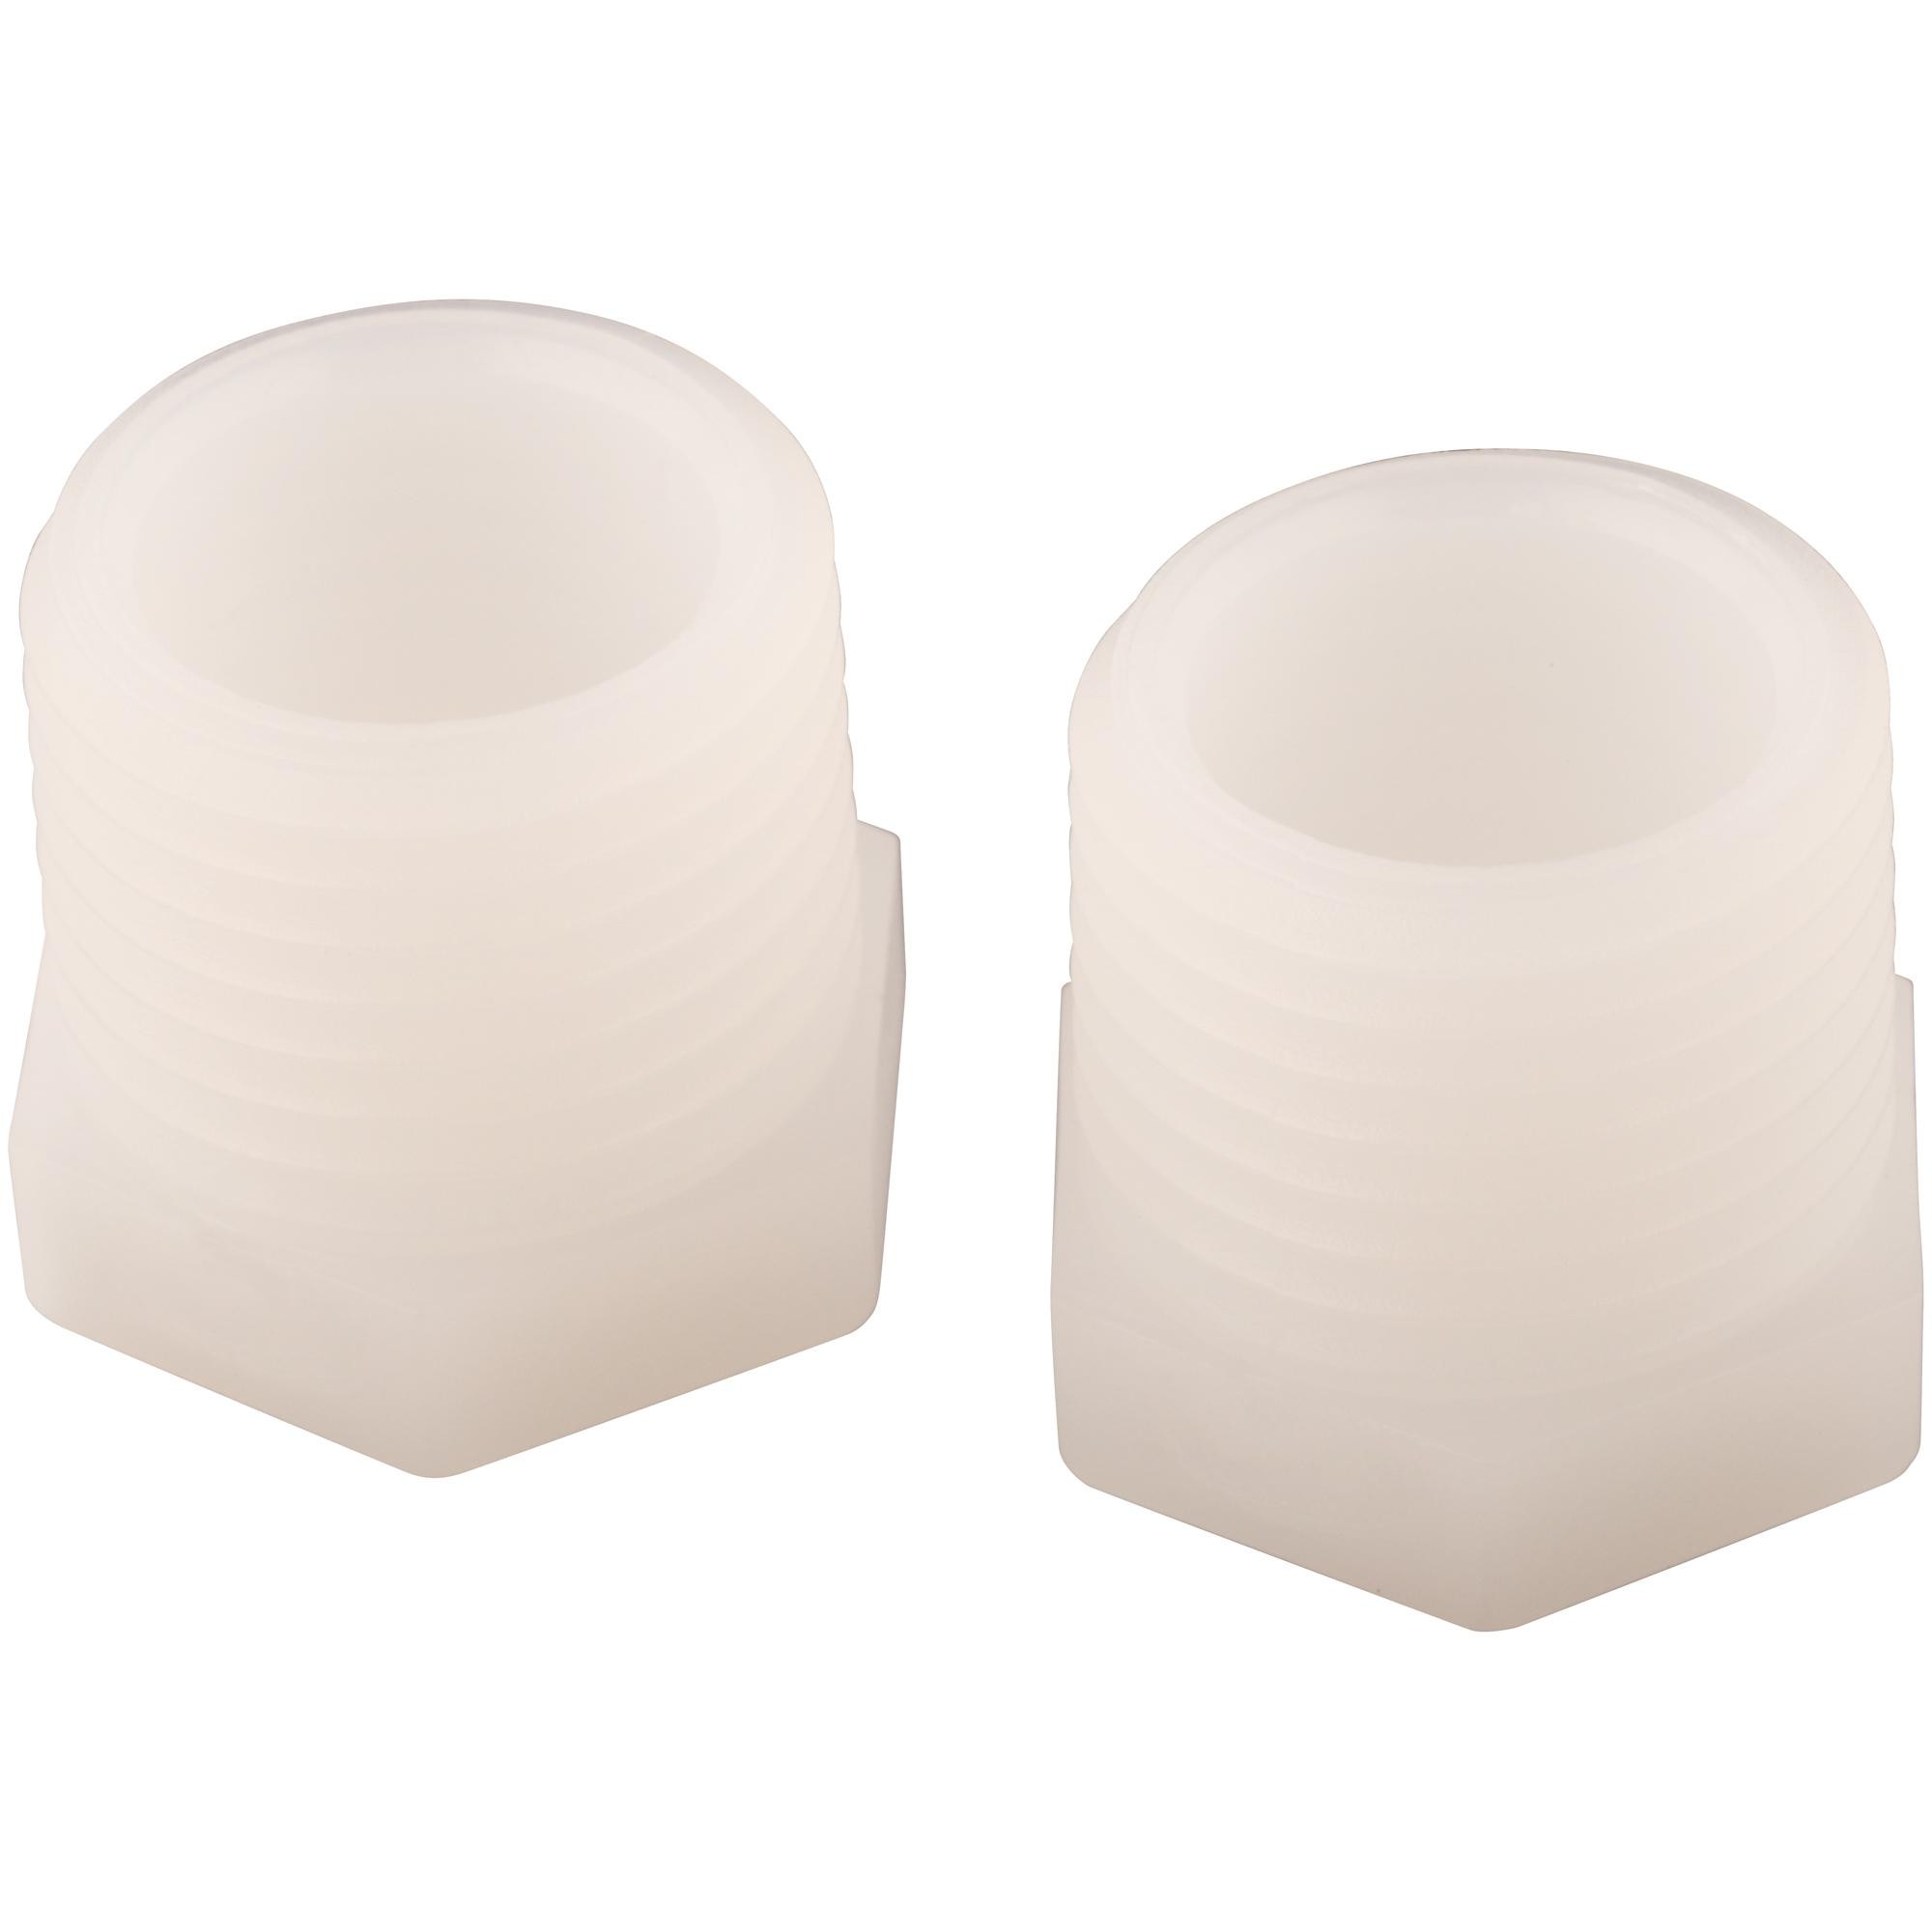 Water Heater Drain Plug - Pack of 2,1/2 Inch , White